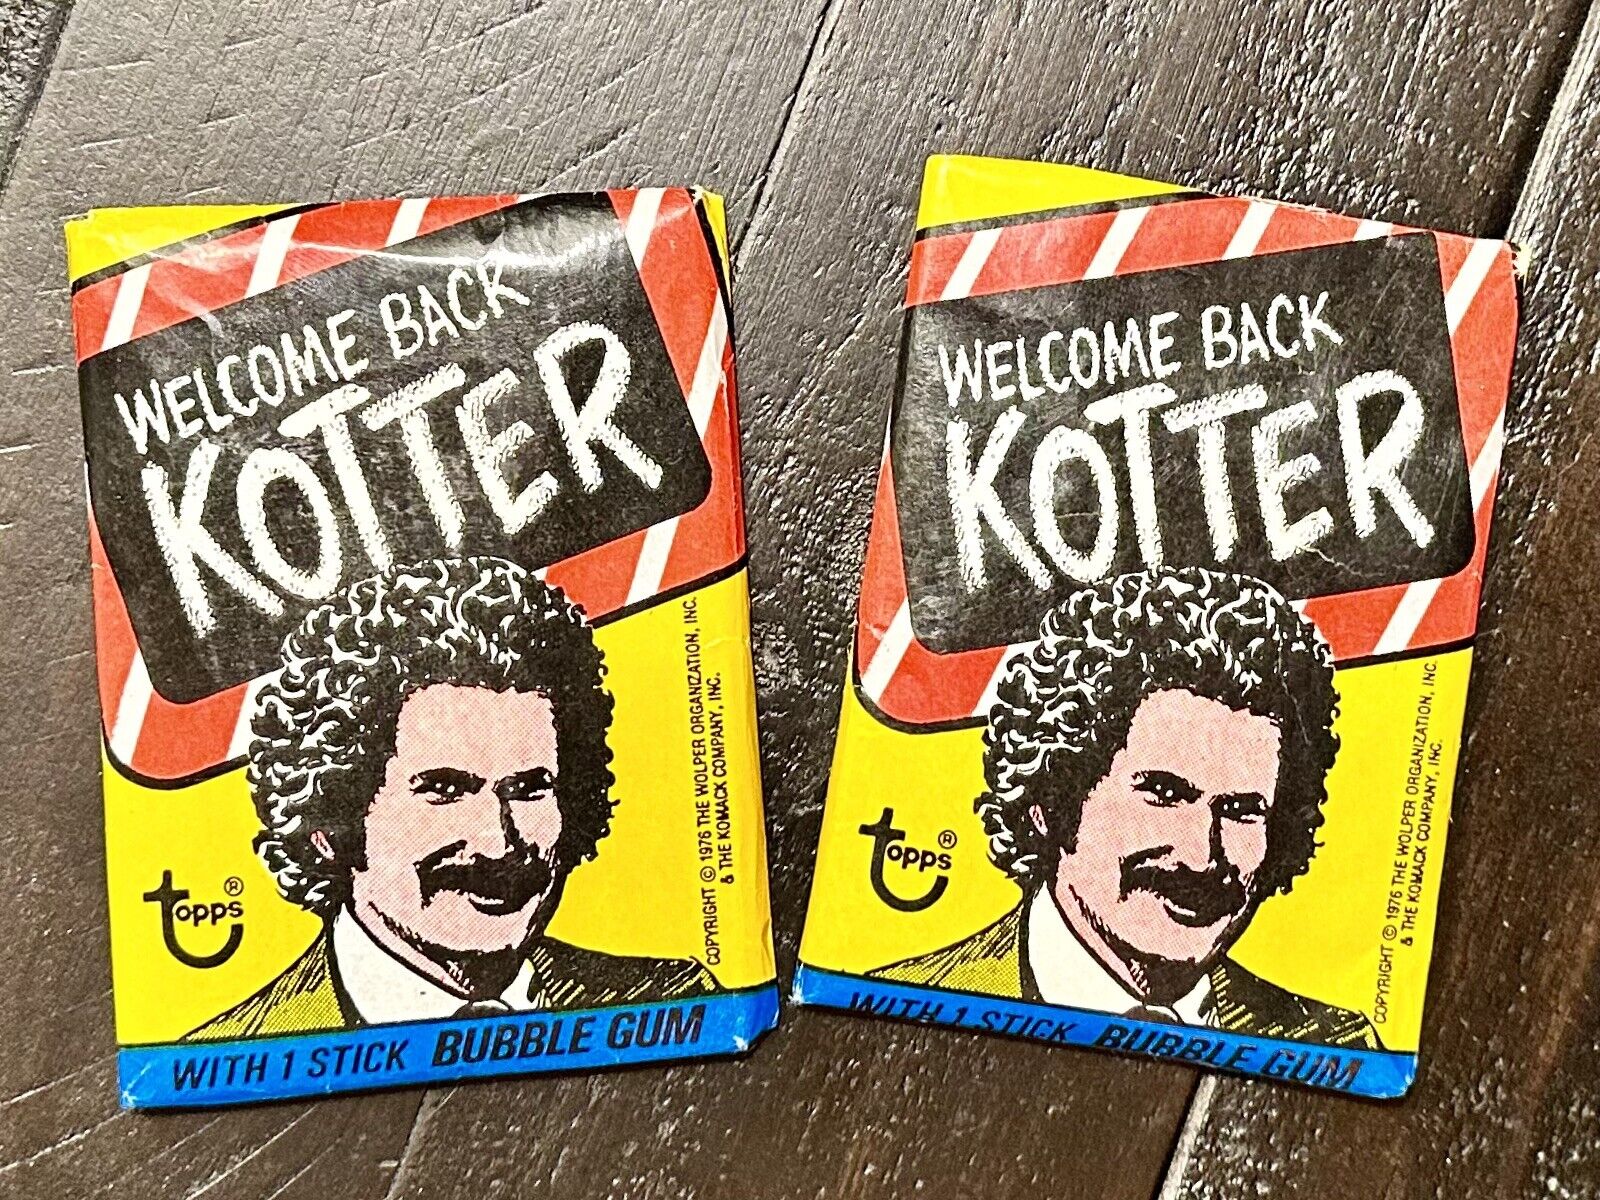 TWO 1976 Topps WELCOME BACK KOTTER SEALED Wax Pack +2 BONUS CARDS LAST 2